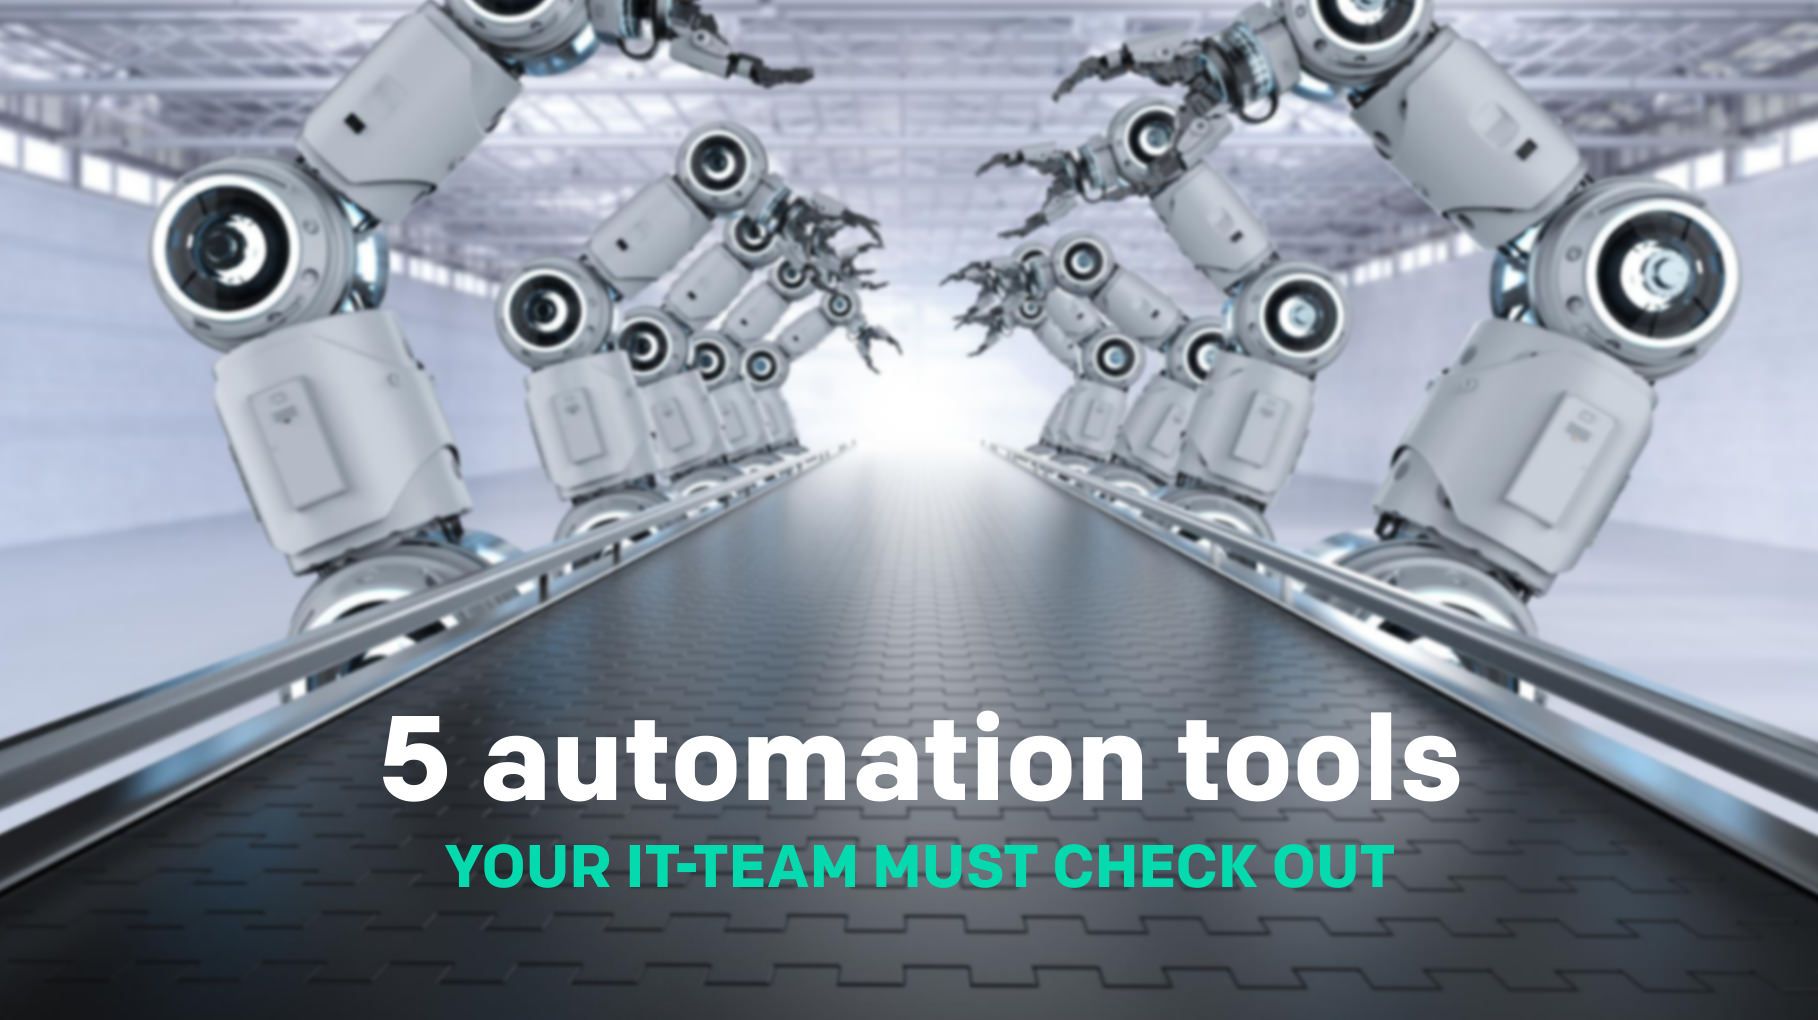 5 IT automation tools your team must check out